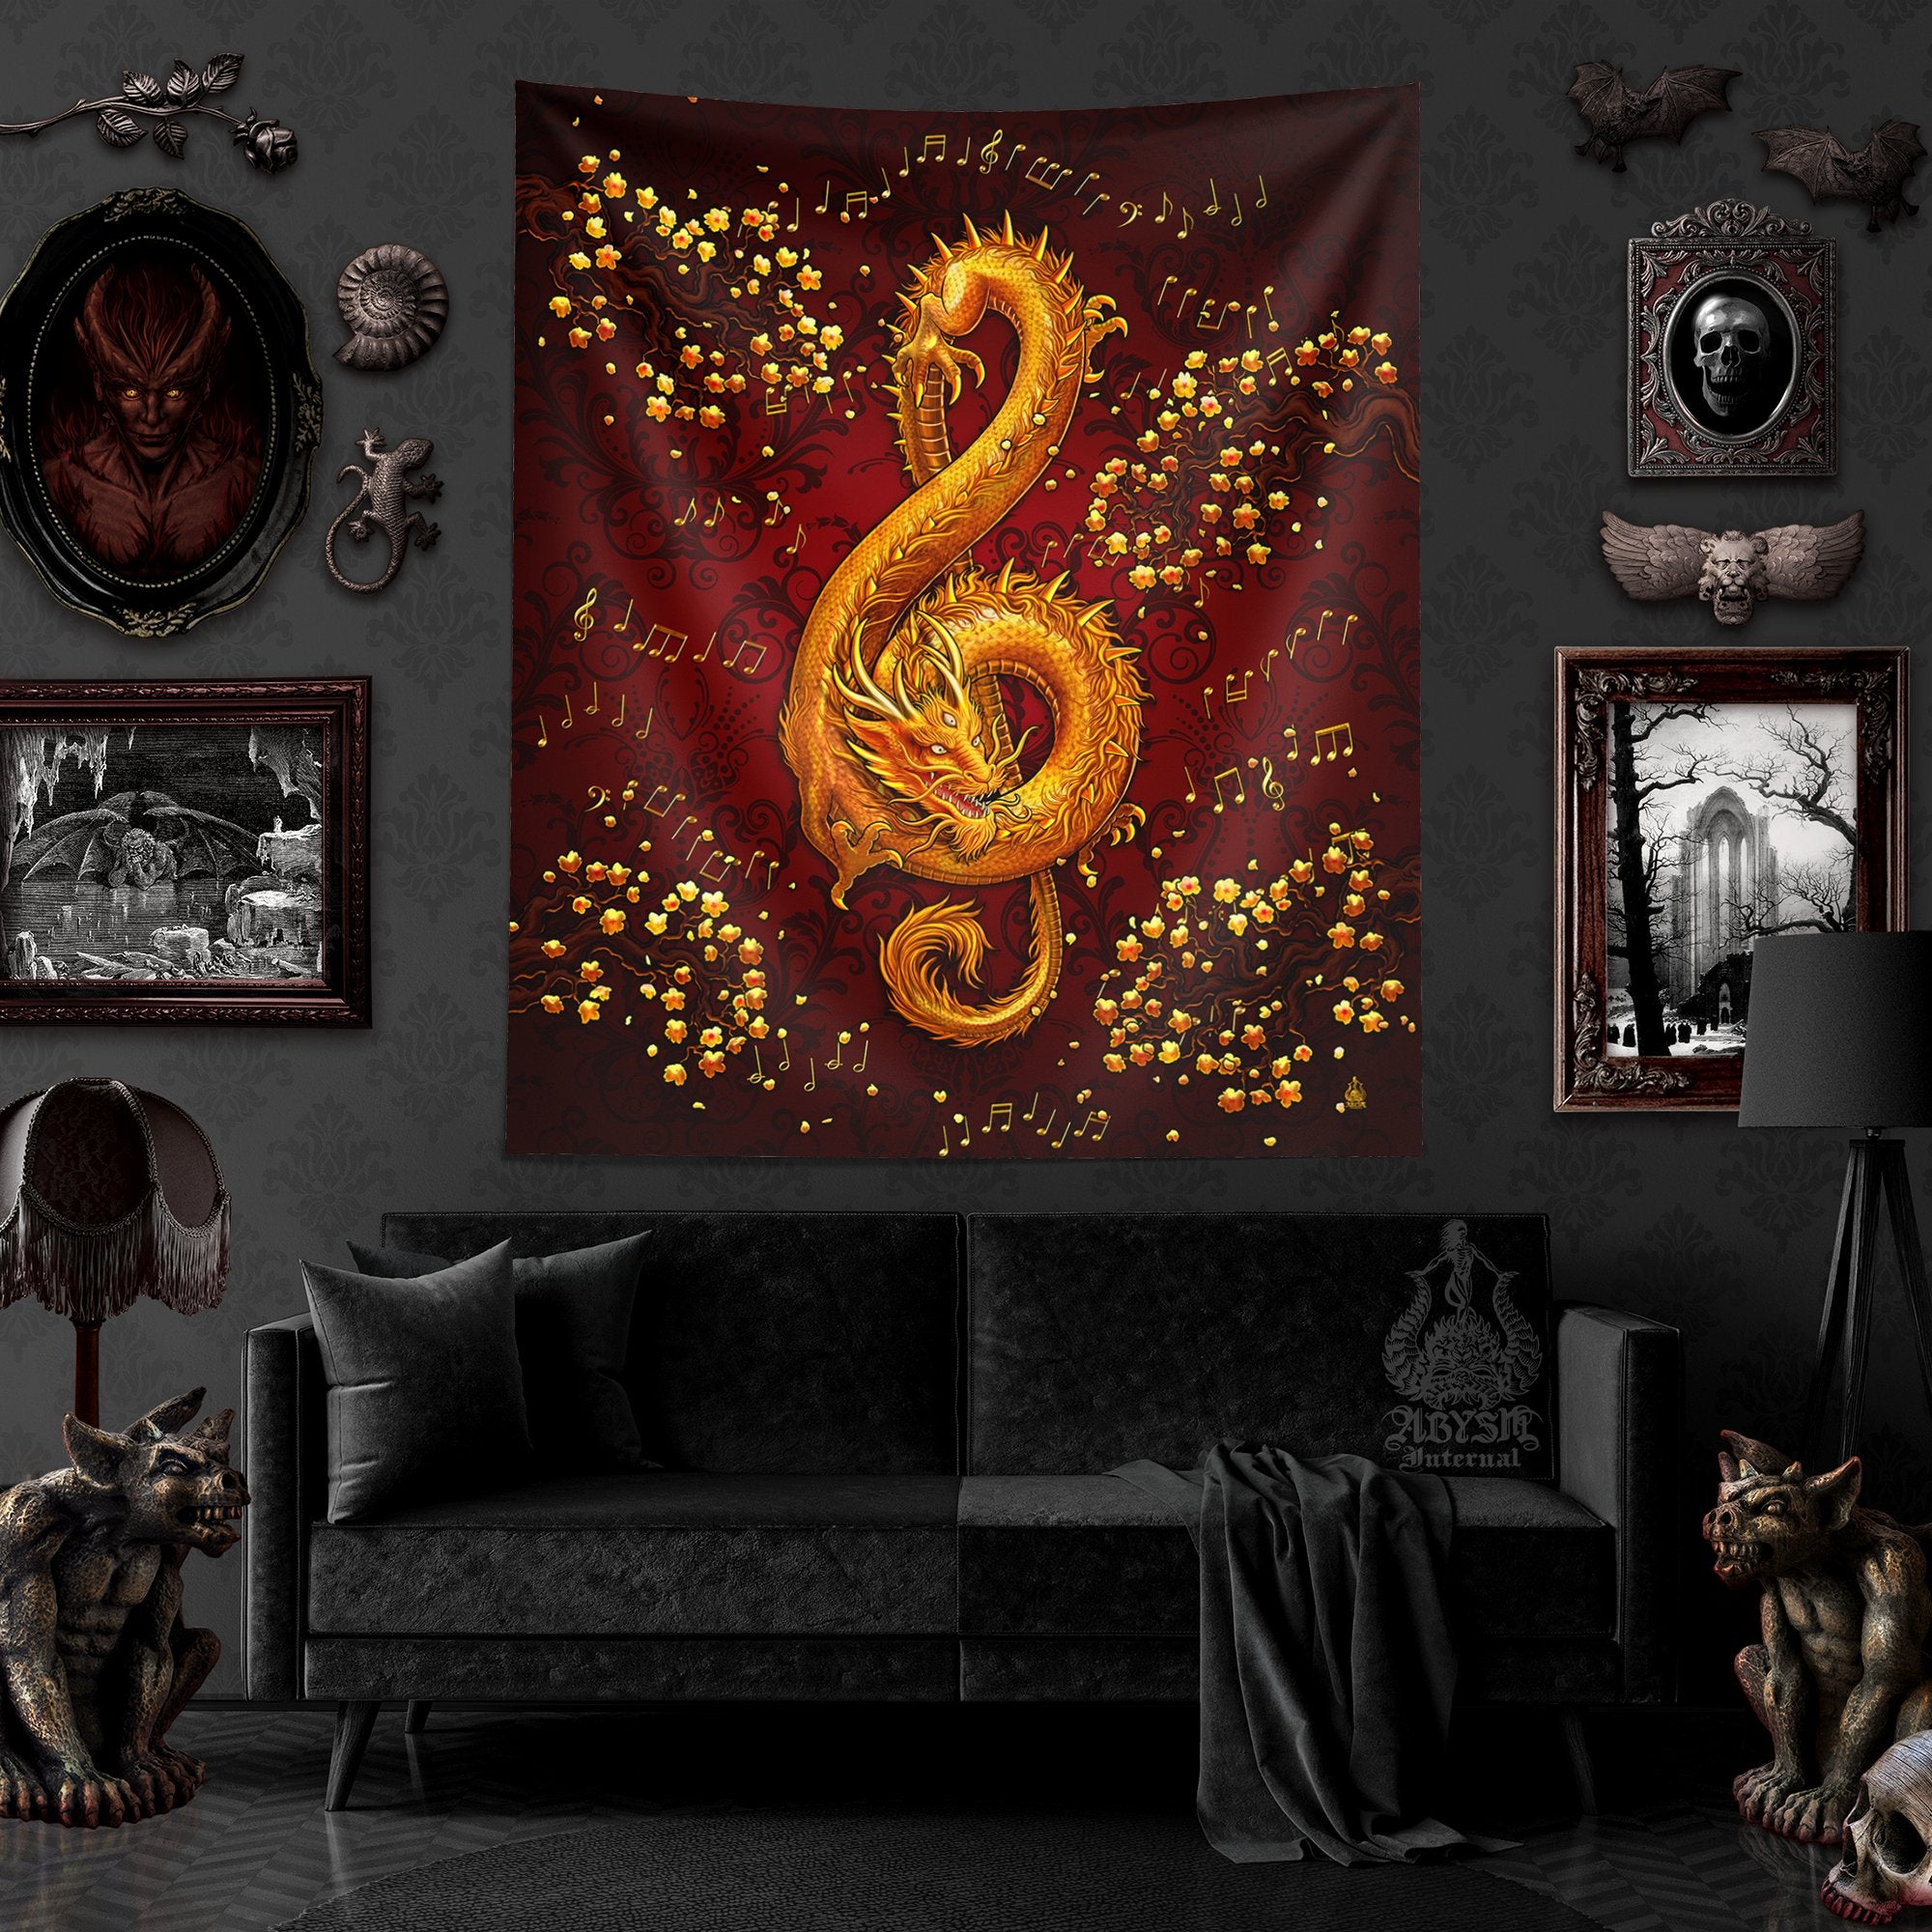 Dragon Tapestry, Music Wall Hanging, Eclectic Home Decor, Vertical Art Print - Gold Red, Treble Clef - Abysm Internal